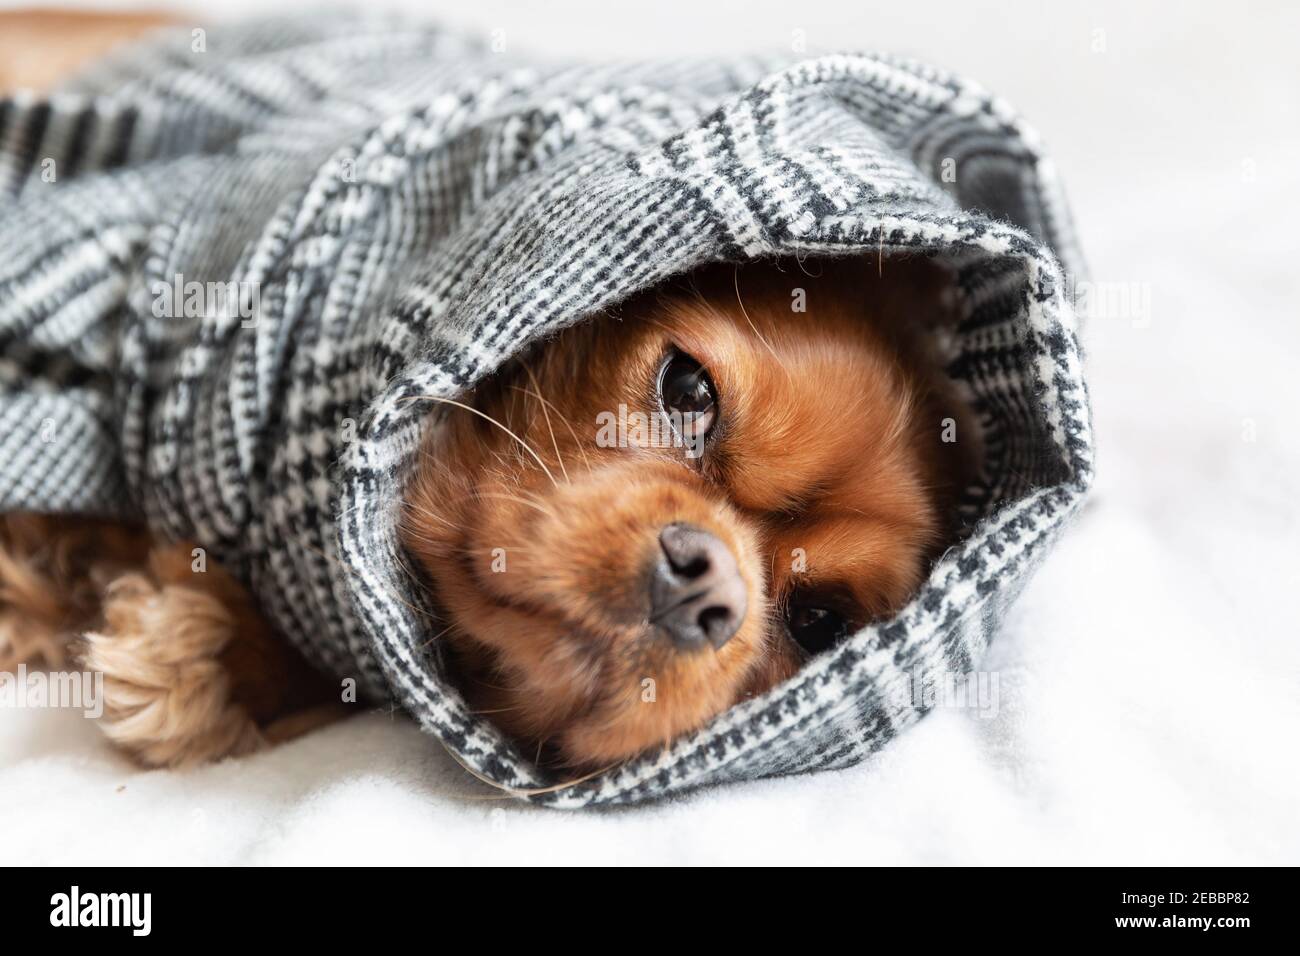 Dog wrapped in a warm scarf like burrito Stock Photo